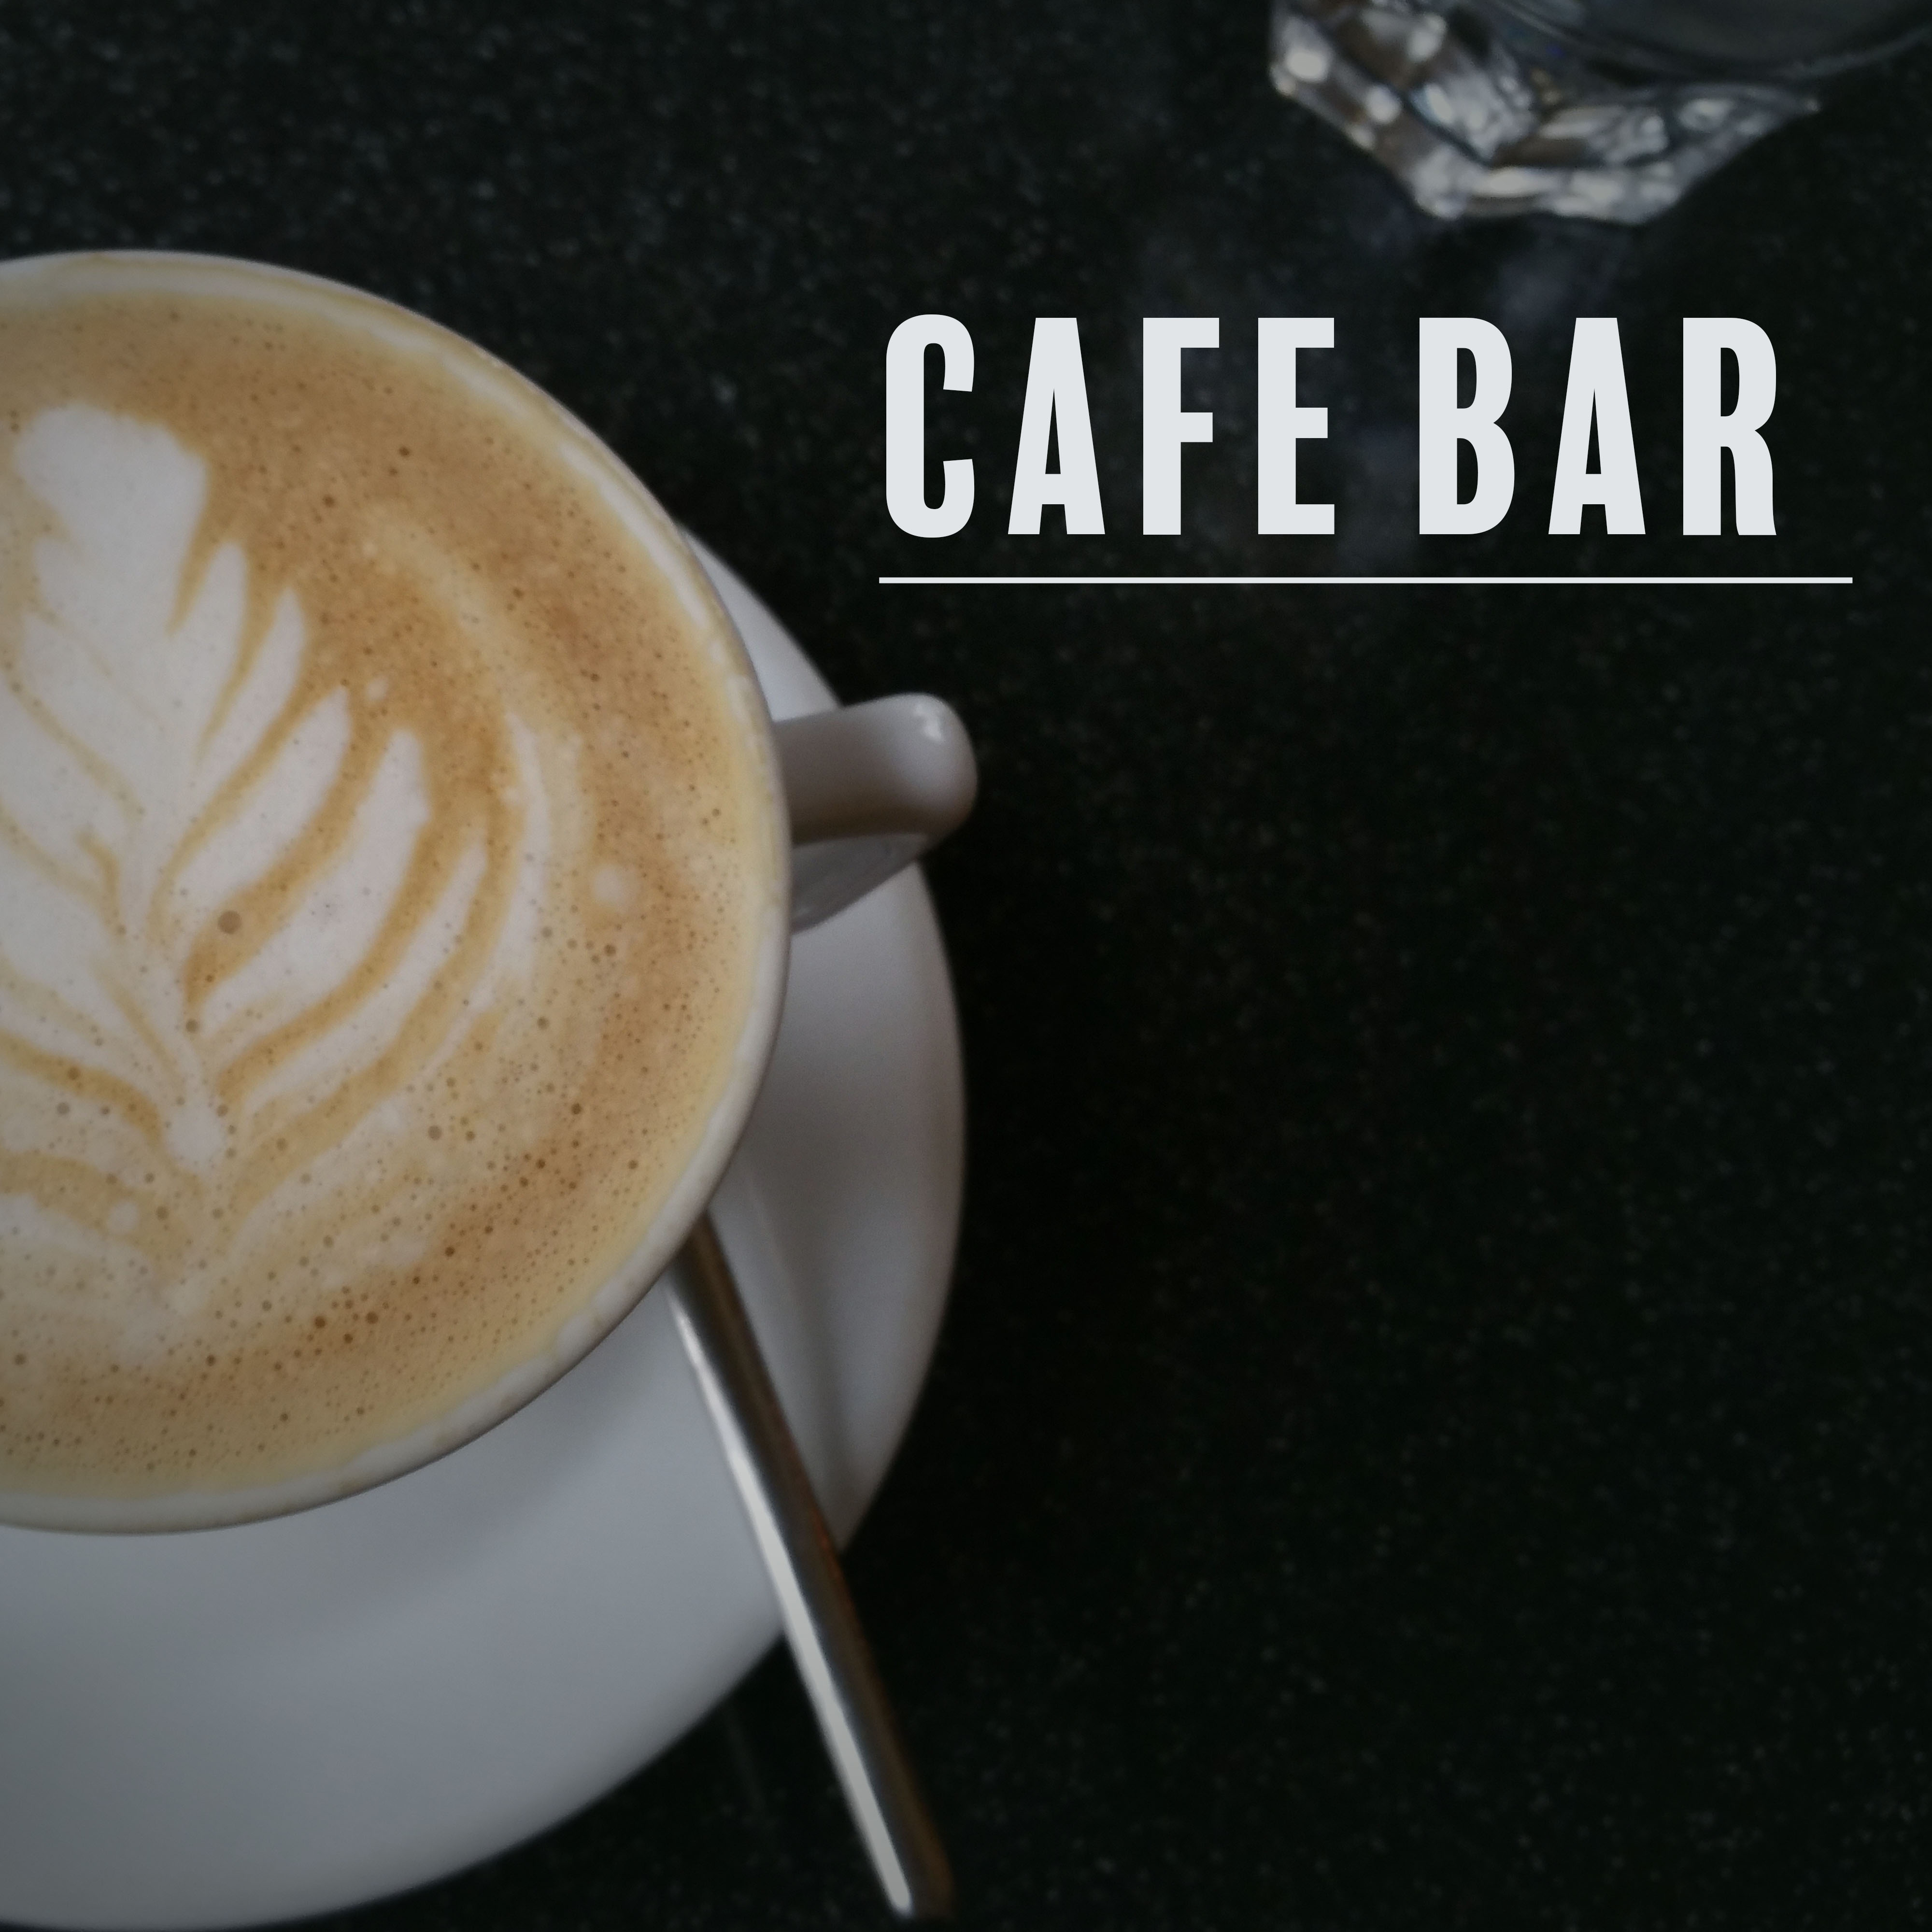 Cafe Bar  Chilled Jazz, Restaurant Music, Deep Relaxation, Cafe Music, Meeting with Friends, Smooth Jazz, Piano Bar, Gentle Guitar